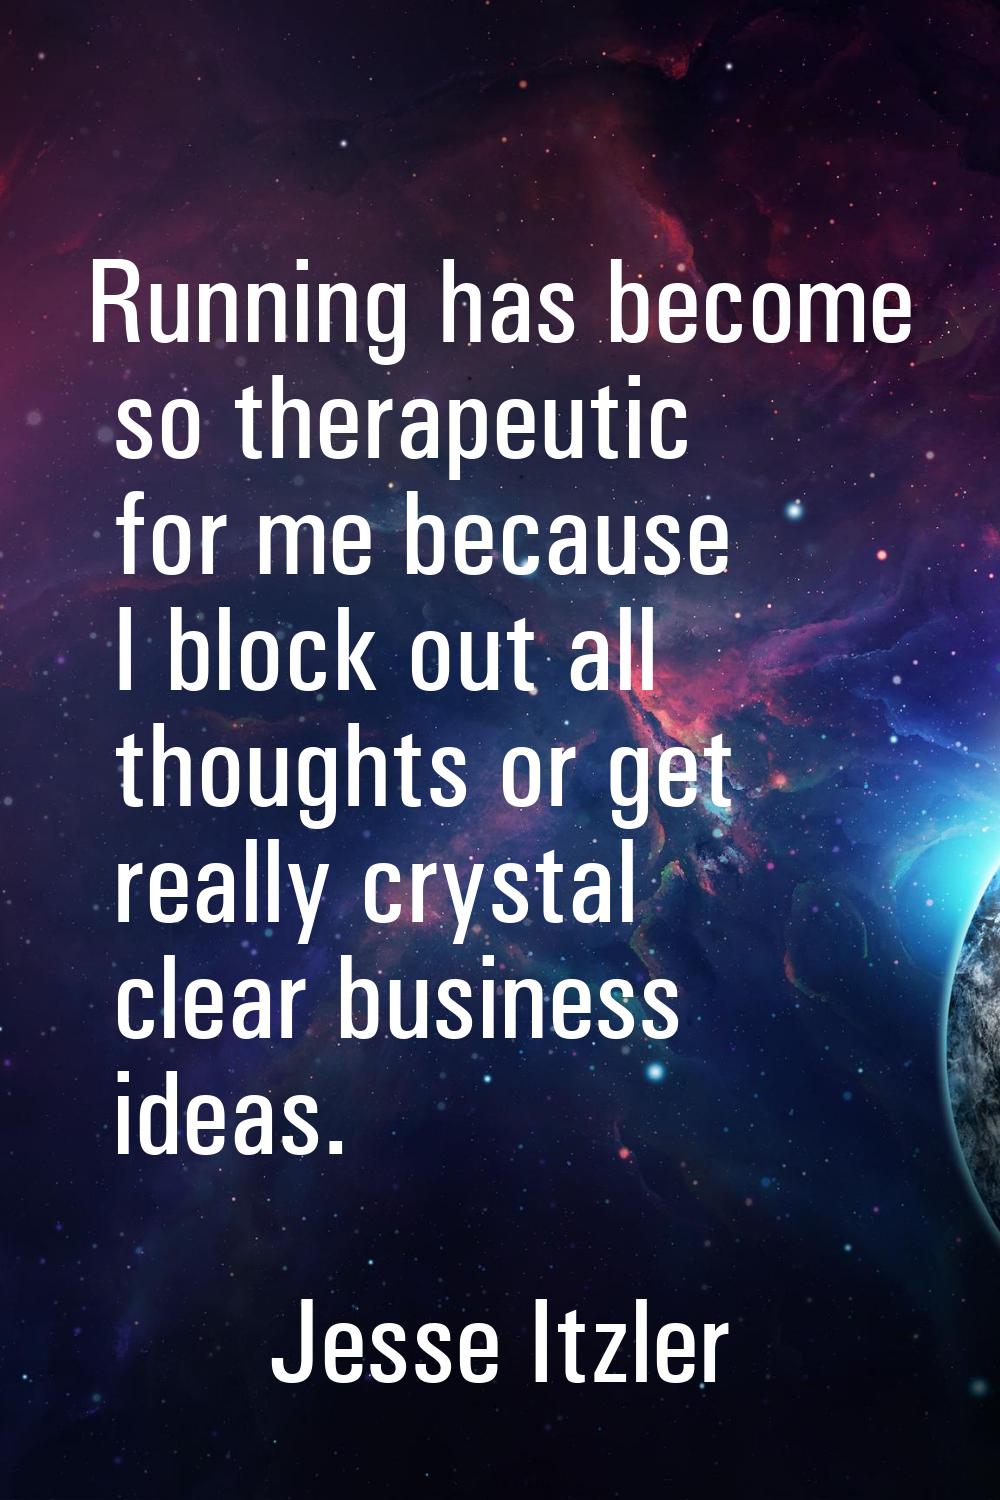 Running has become so therapeutic for me because I block out all thoughts or get really crystal cle